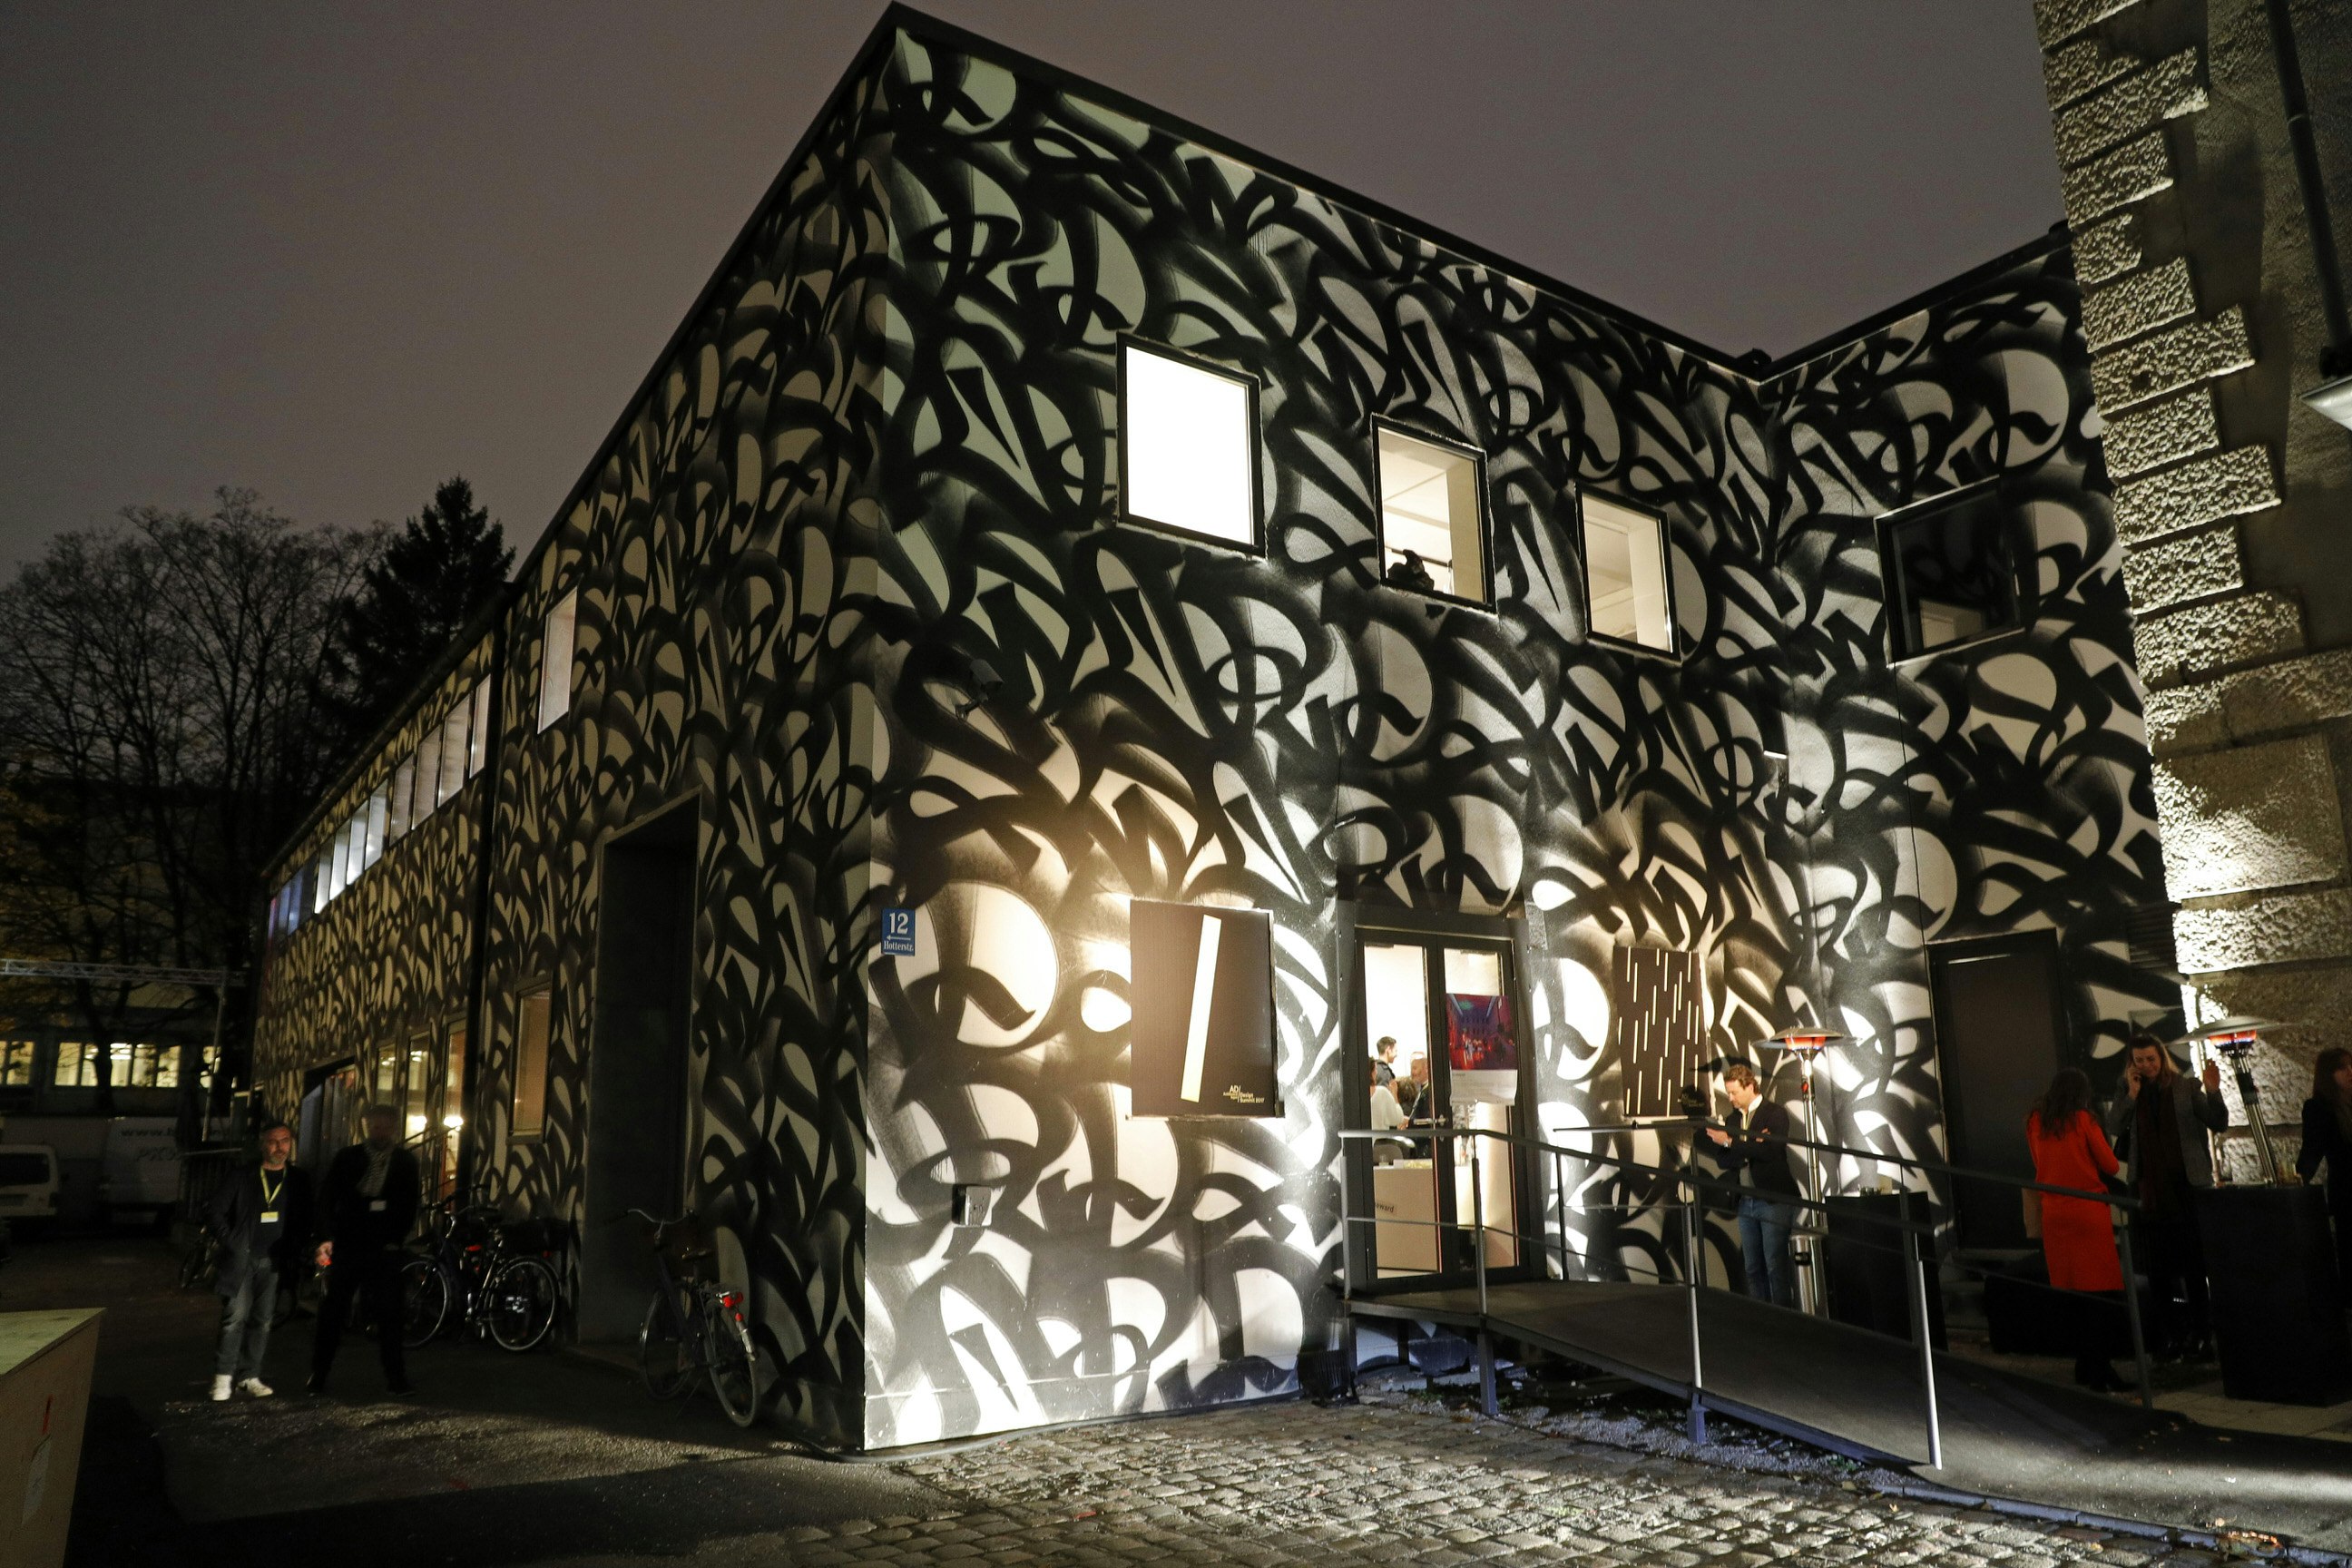 Nighttime exterior shot of an art gallery. The walls are entirely covered in black abstract graffiti against a white background. Some people are milling around outside.